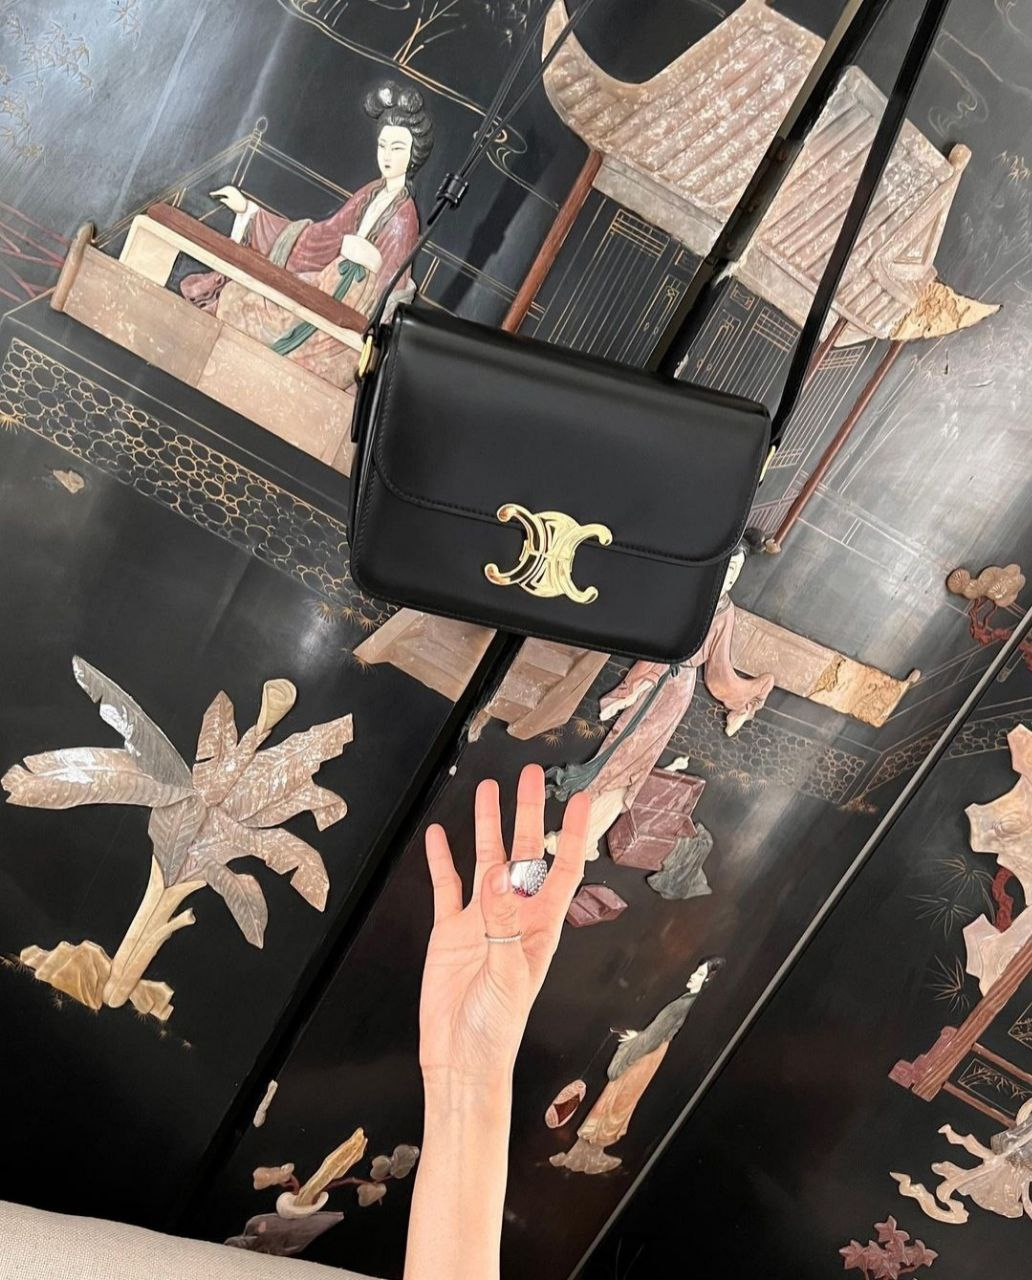 Heart Evangelista's Luxury Bags That You'll Keep Wanting Too - Doctor  Leather